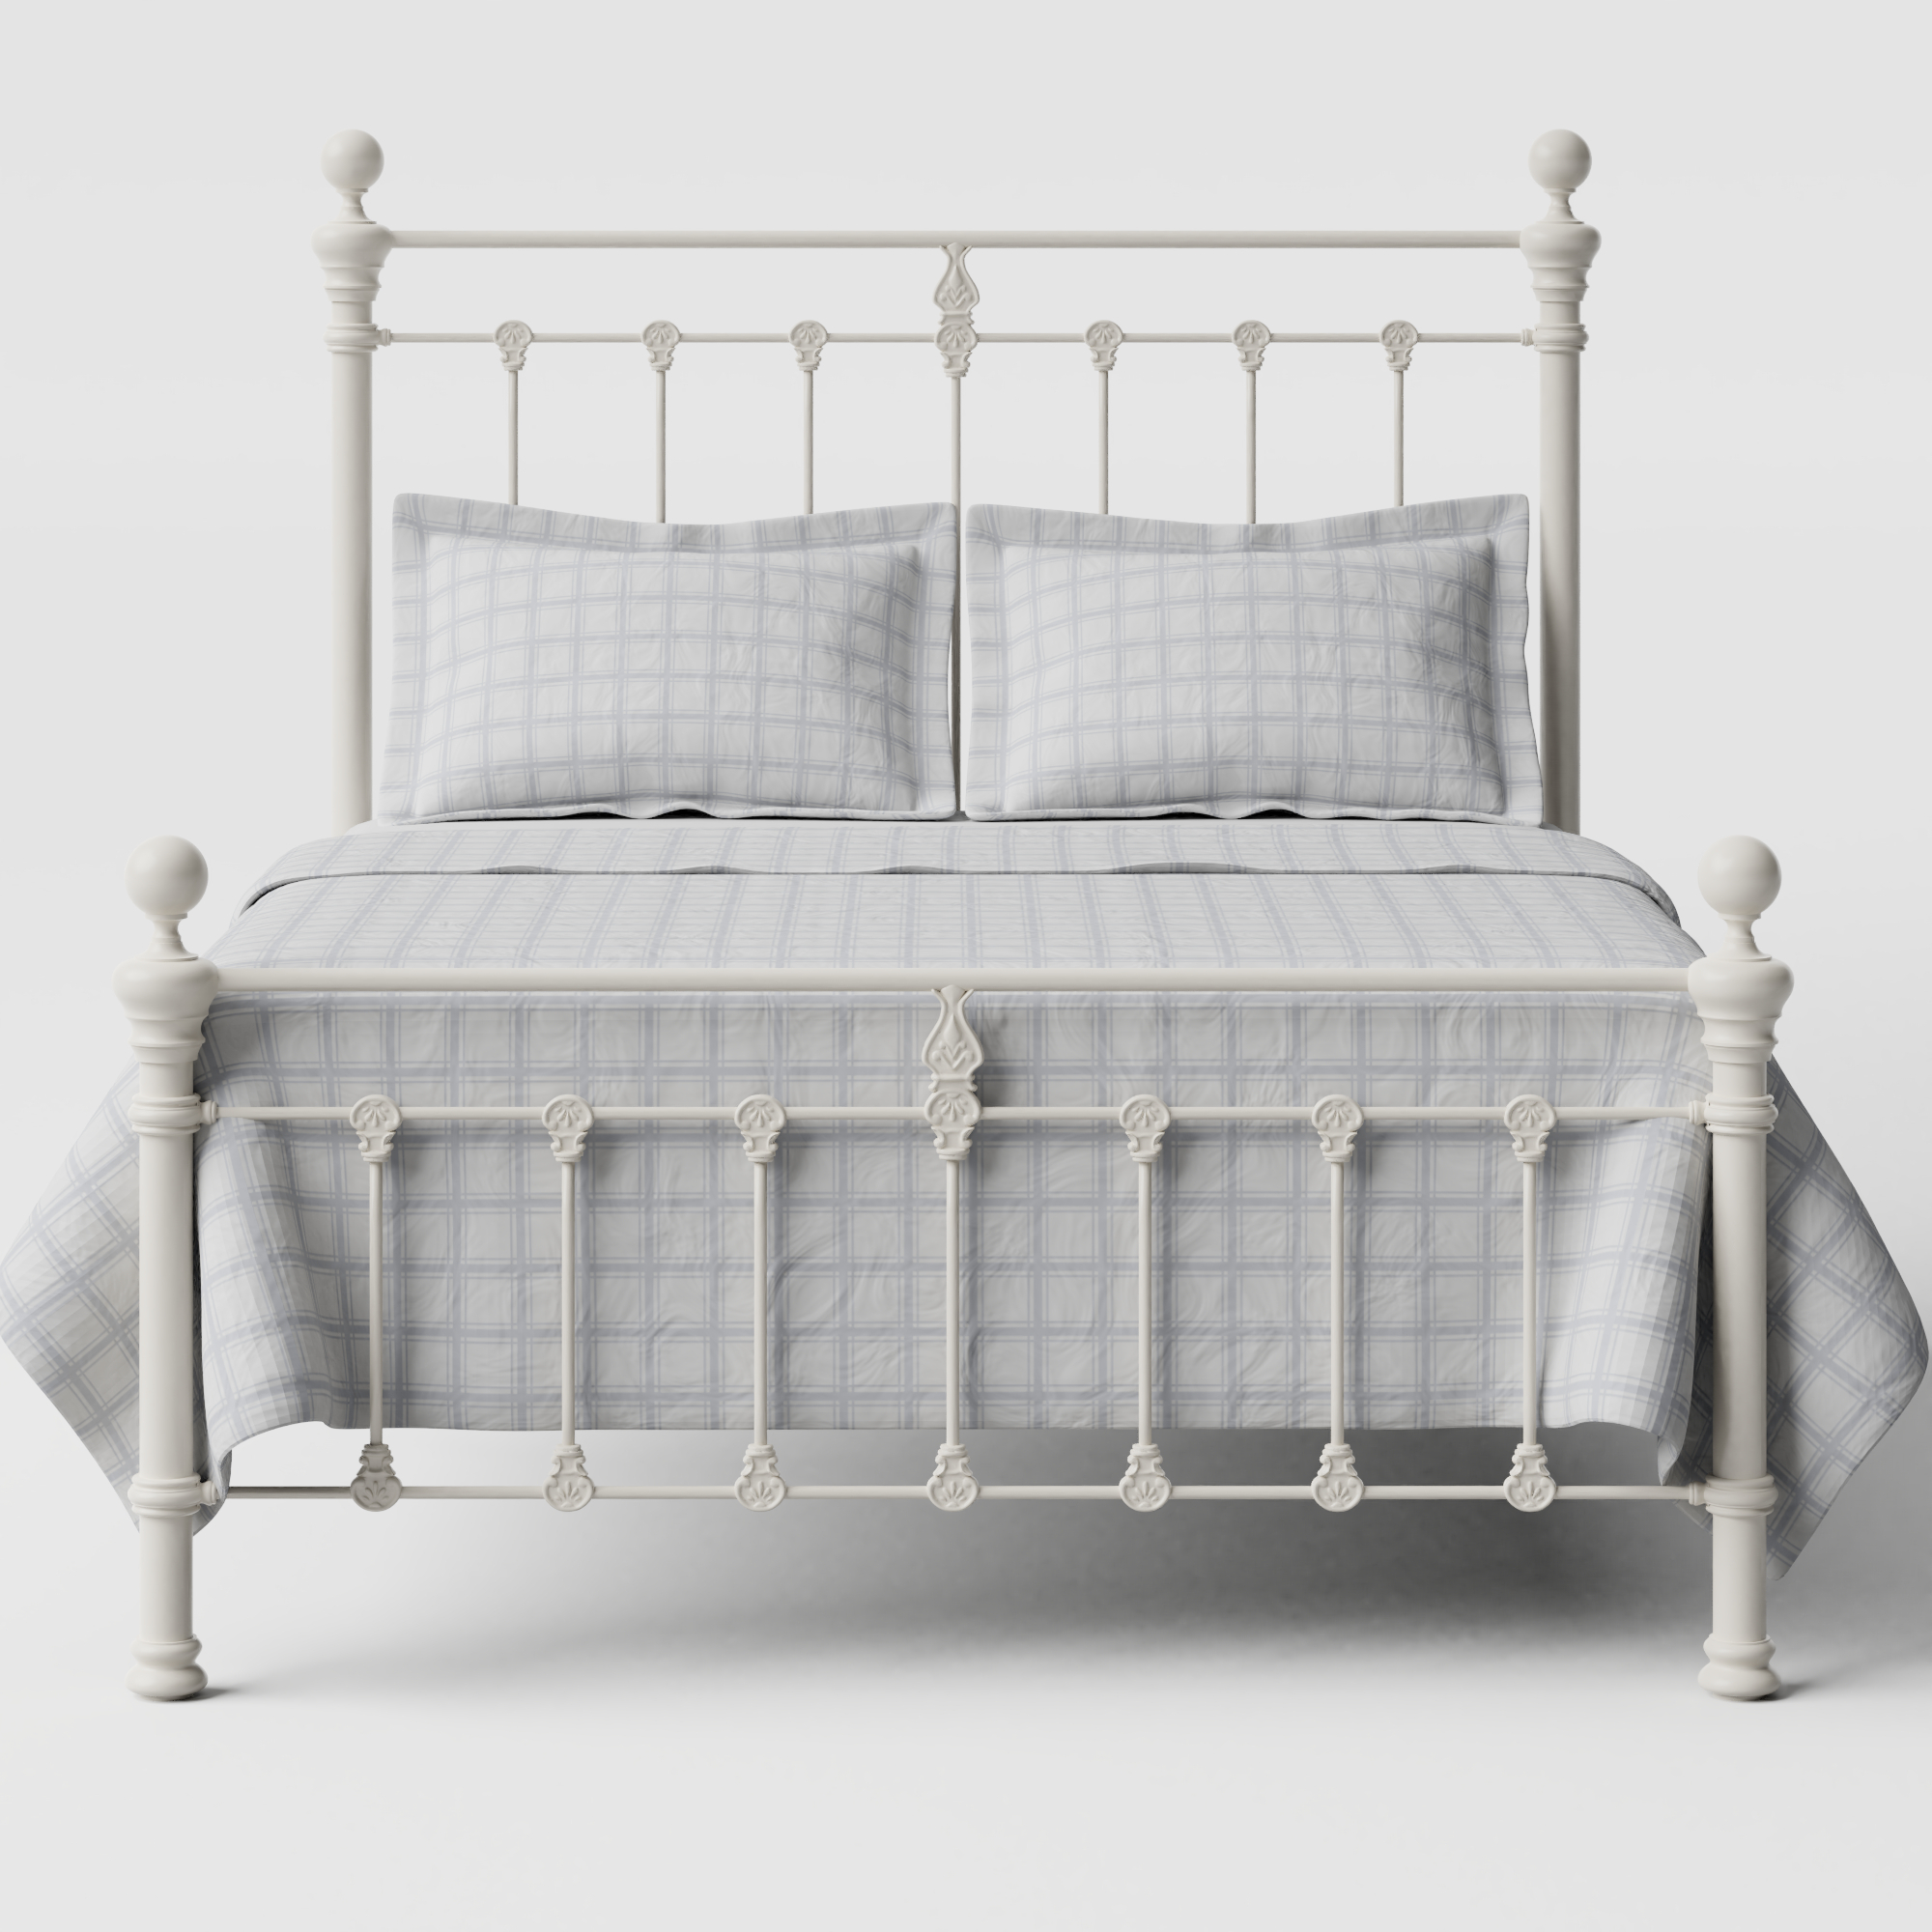 Hamilton Solo Low Footend iron/metal bed in ivory